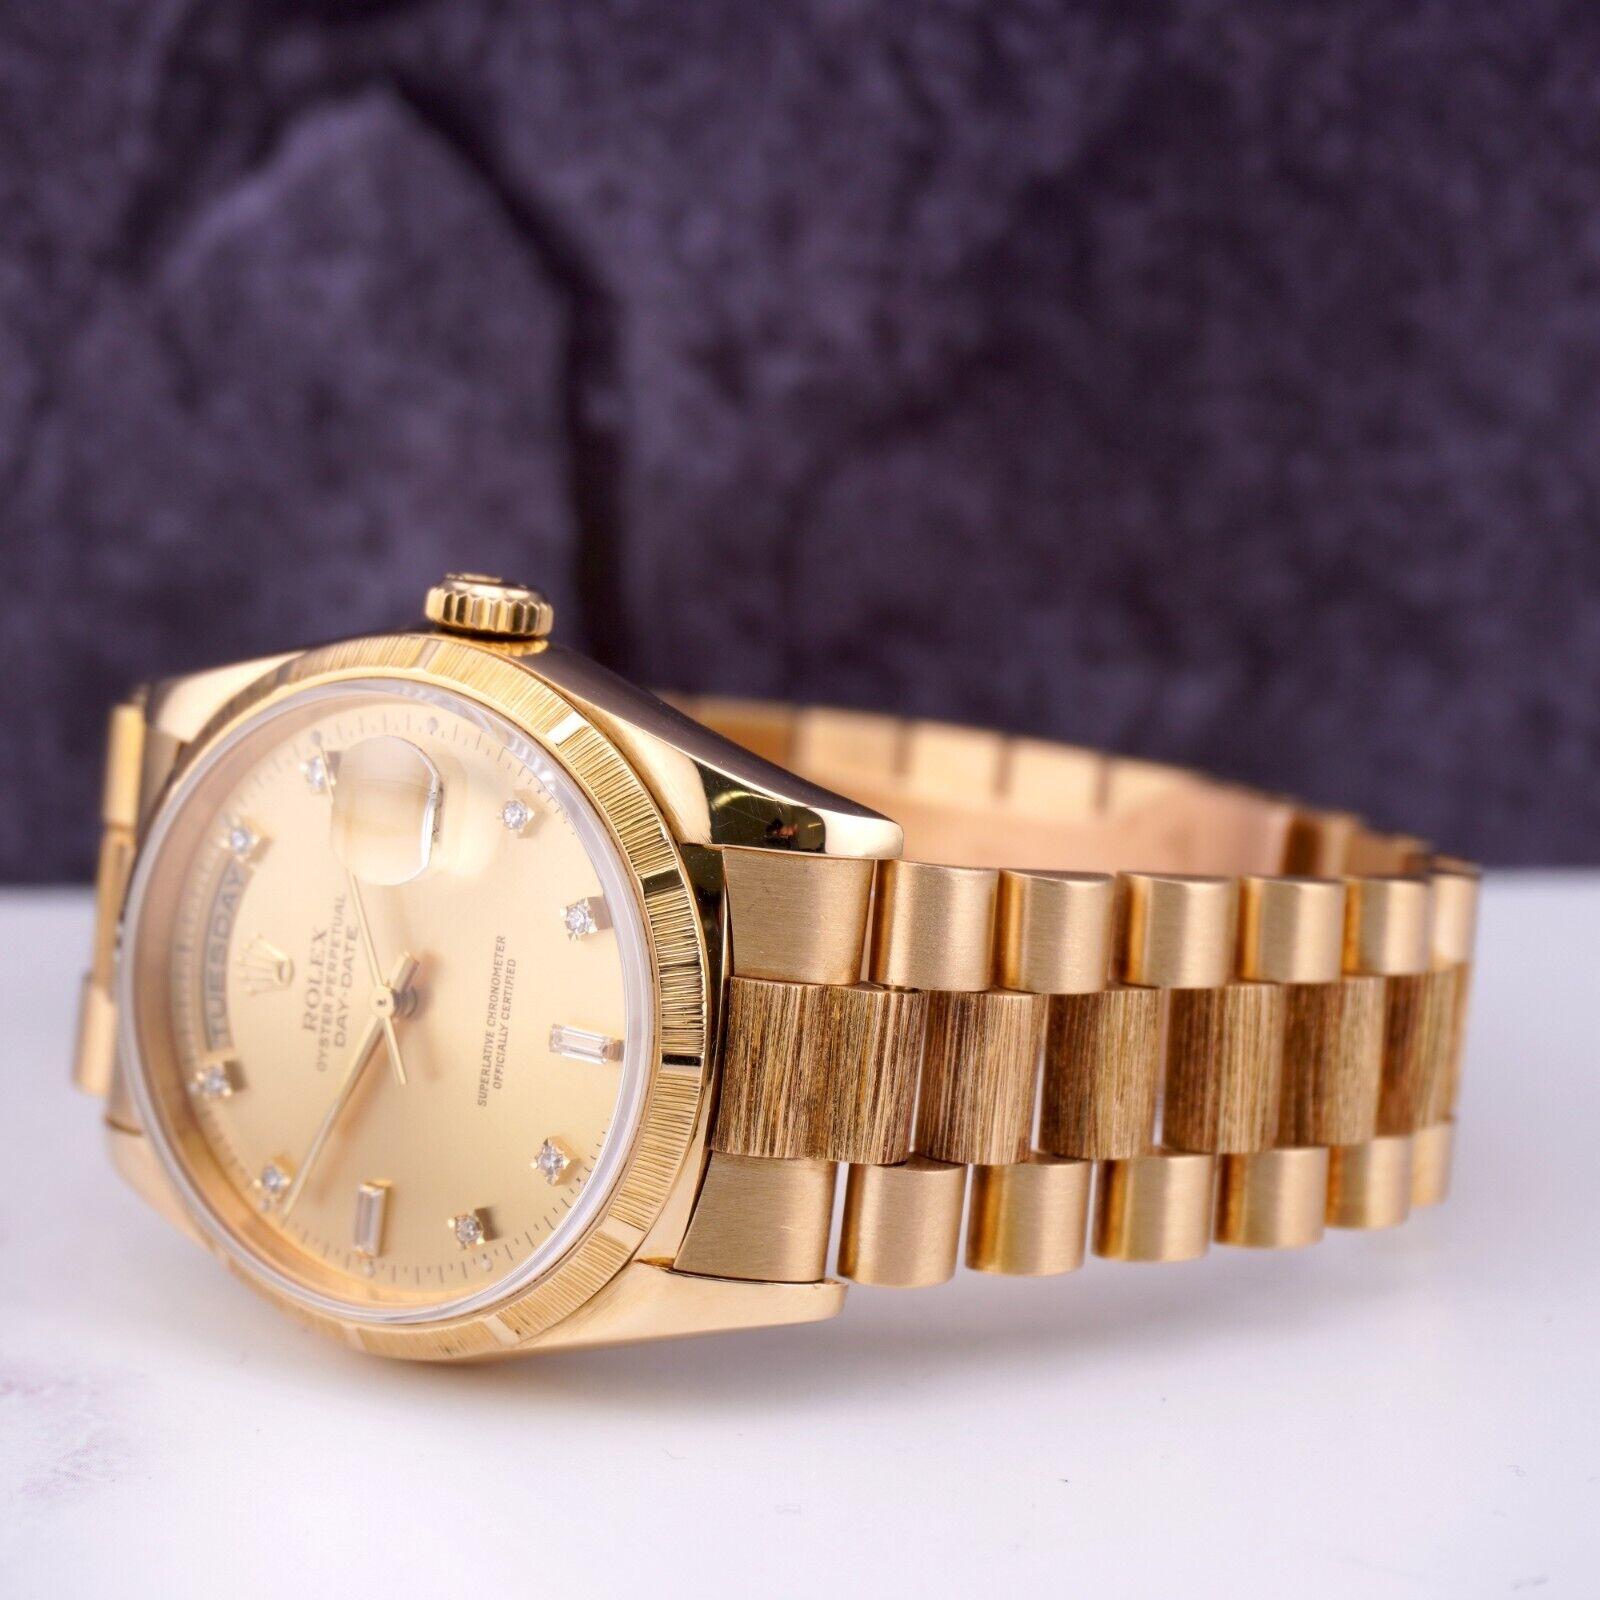 Rolex DAY-DATE 36mm President Men's 18K Yellow Gold Diamond Dial Watch Ref 18248 For Sale 2